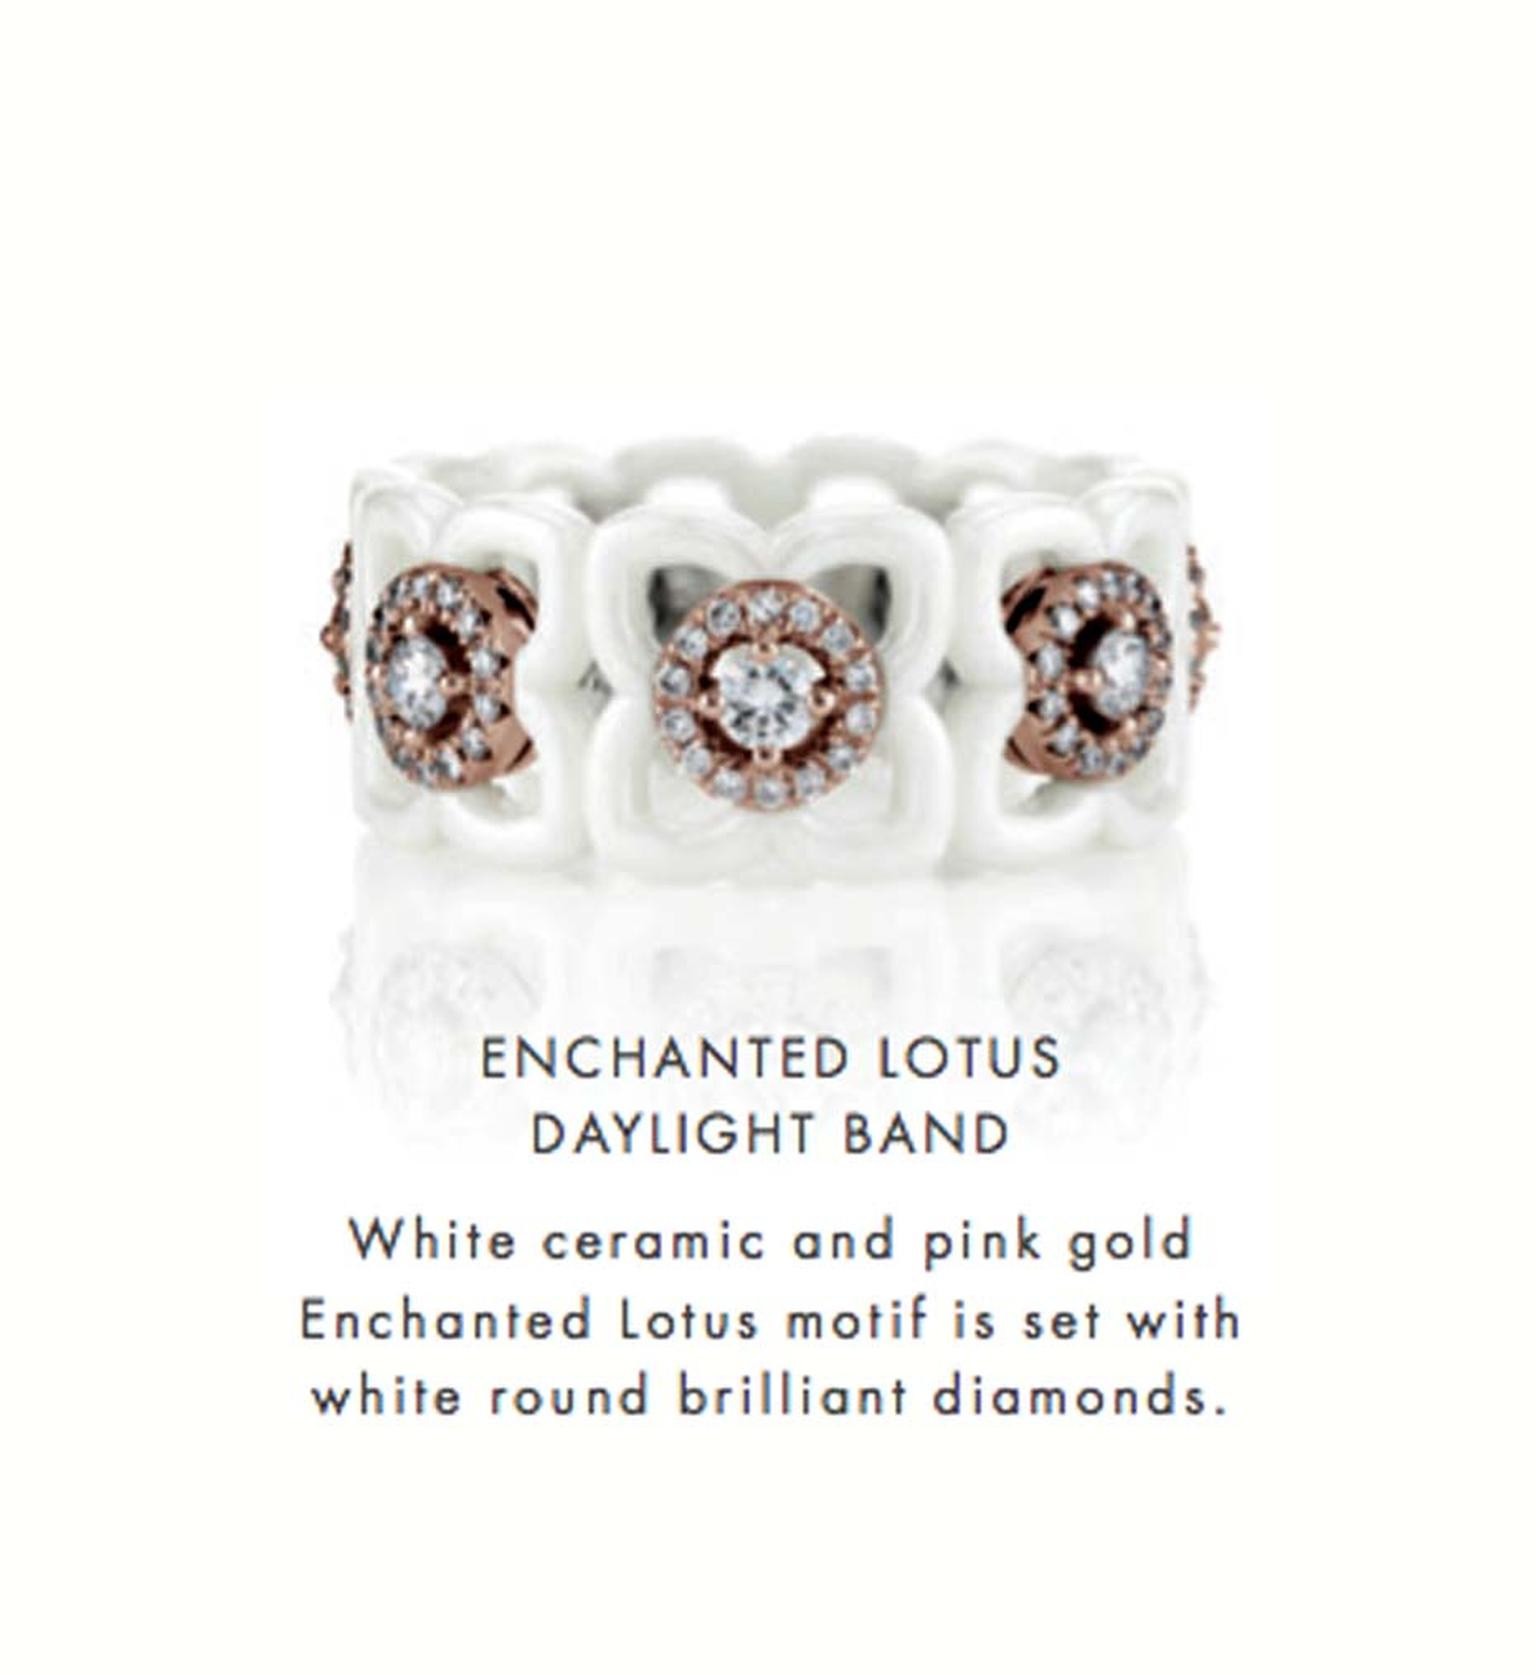 De Beers Enchanted Lotus Daylight ring featuring white ceramic and pink gold and round diamonds.